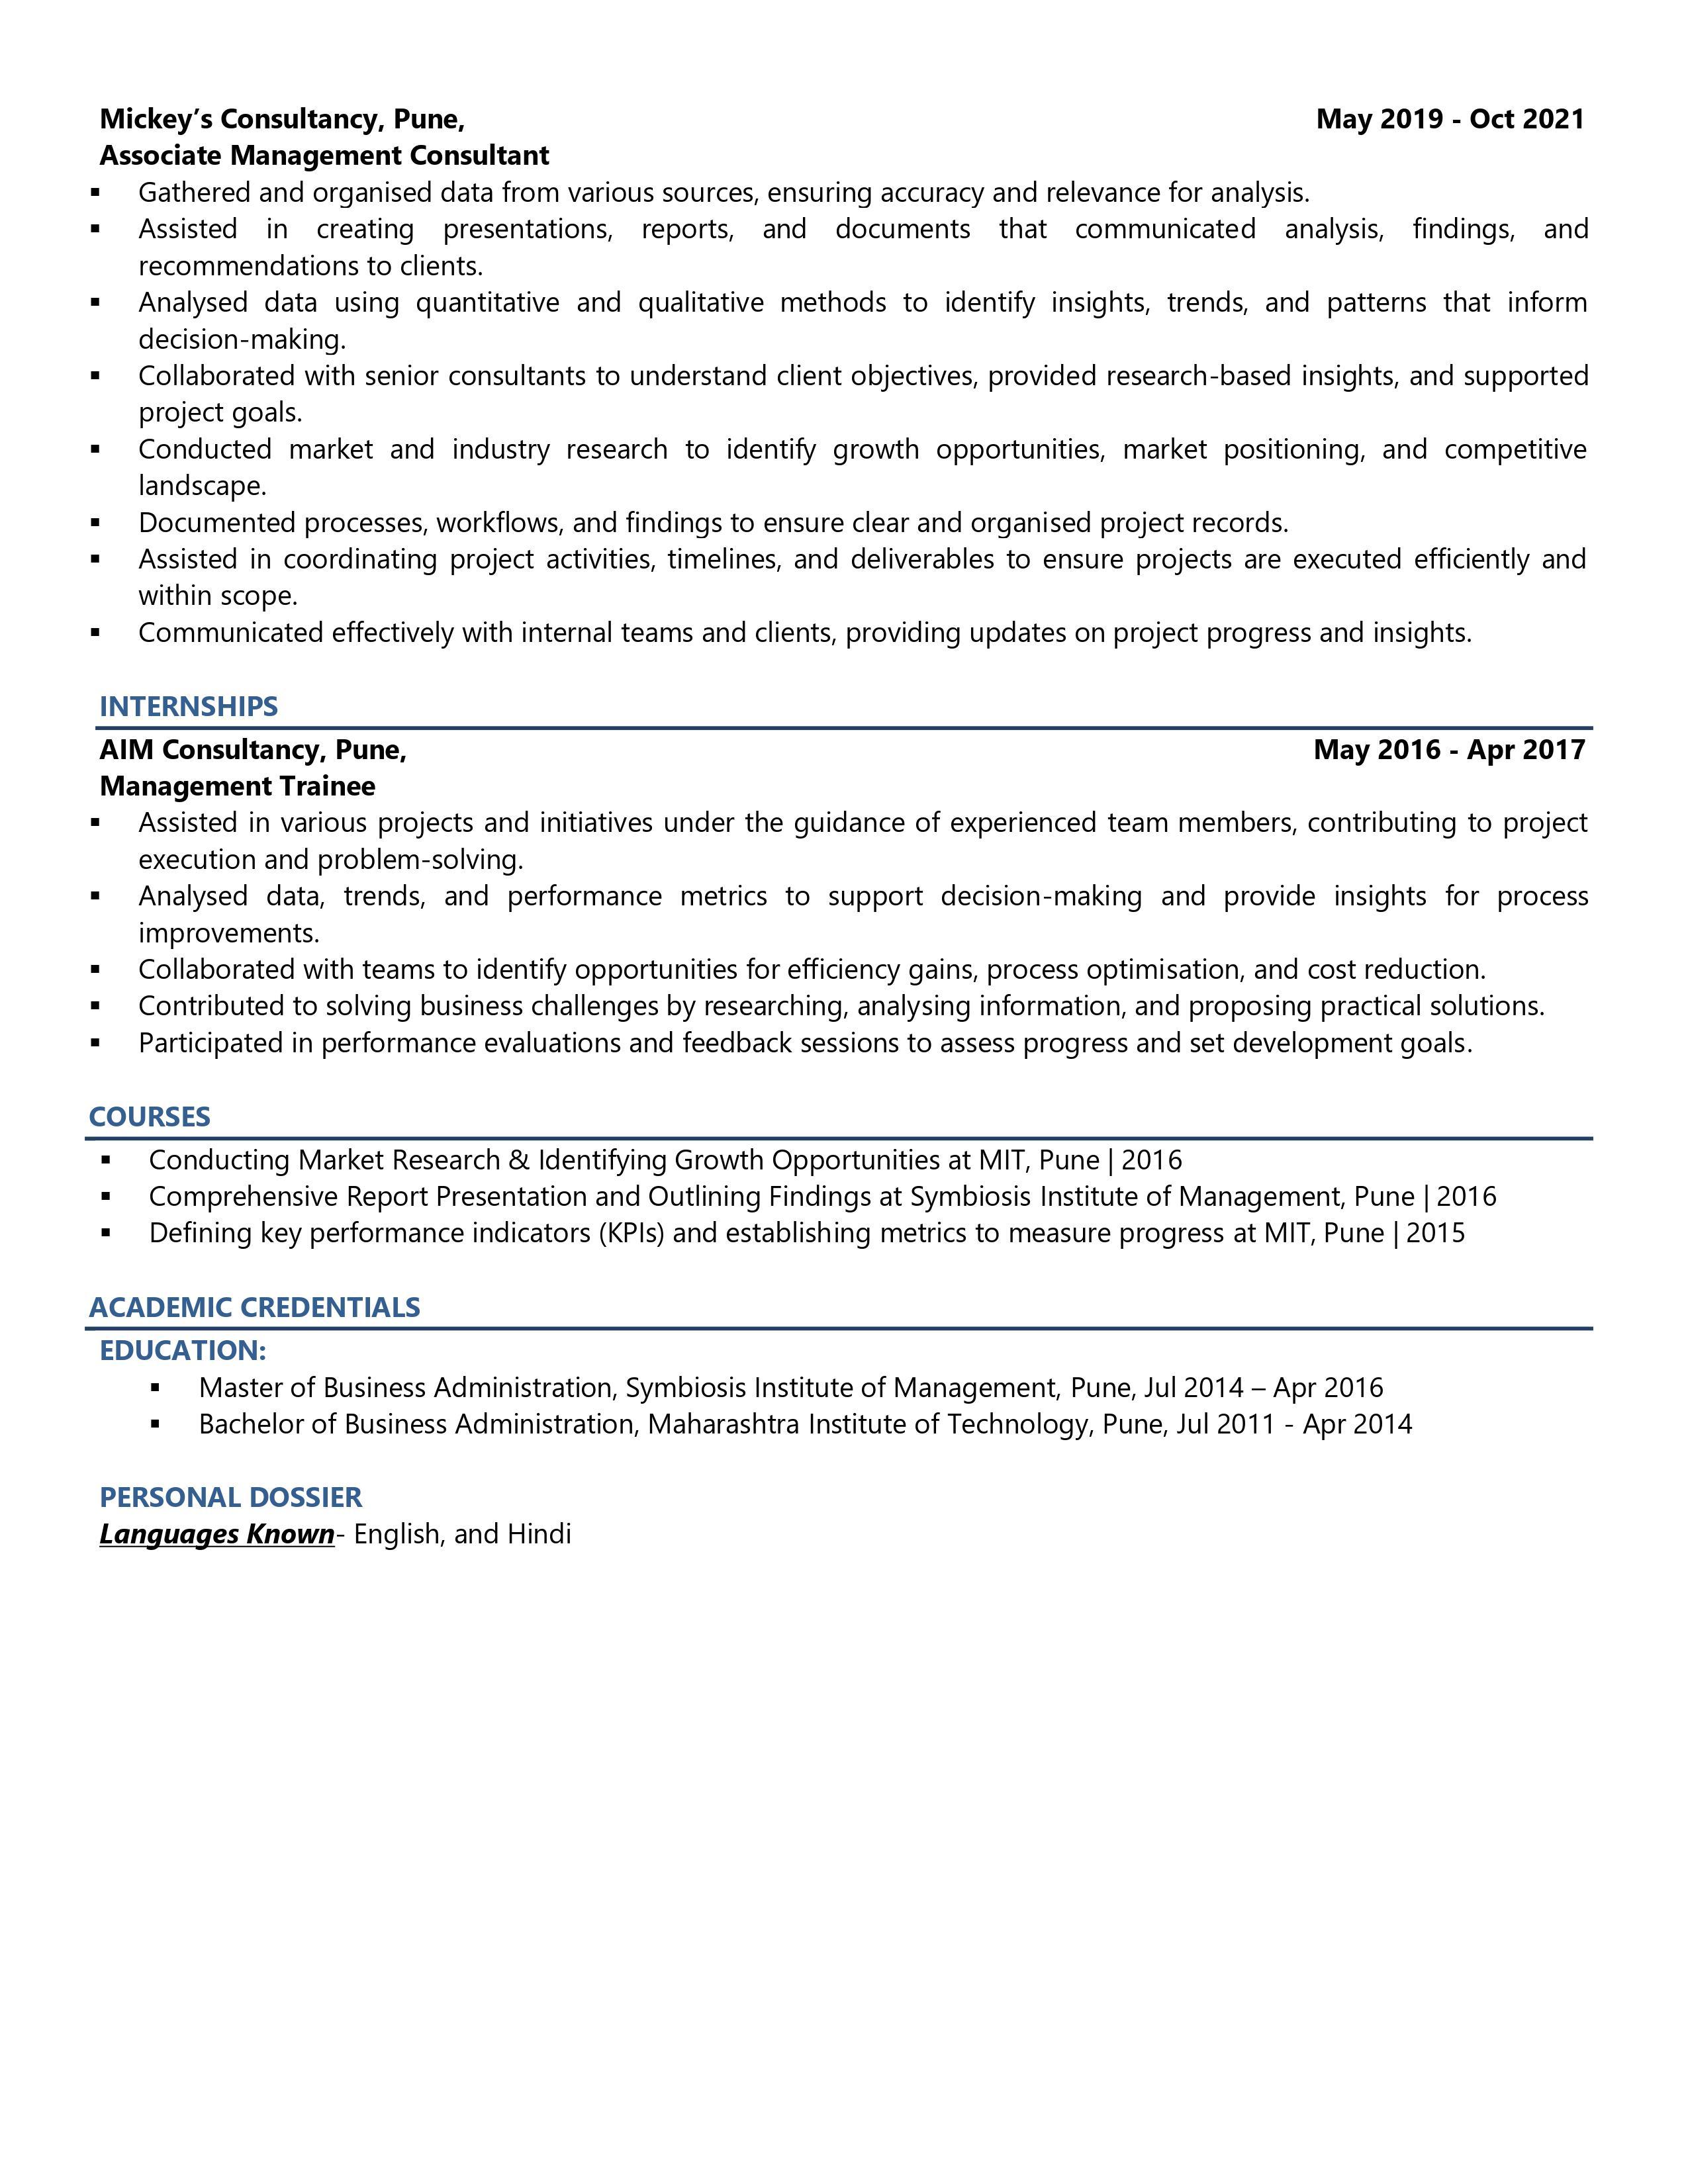 Management Consultant - Resume Example & Template